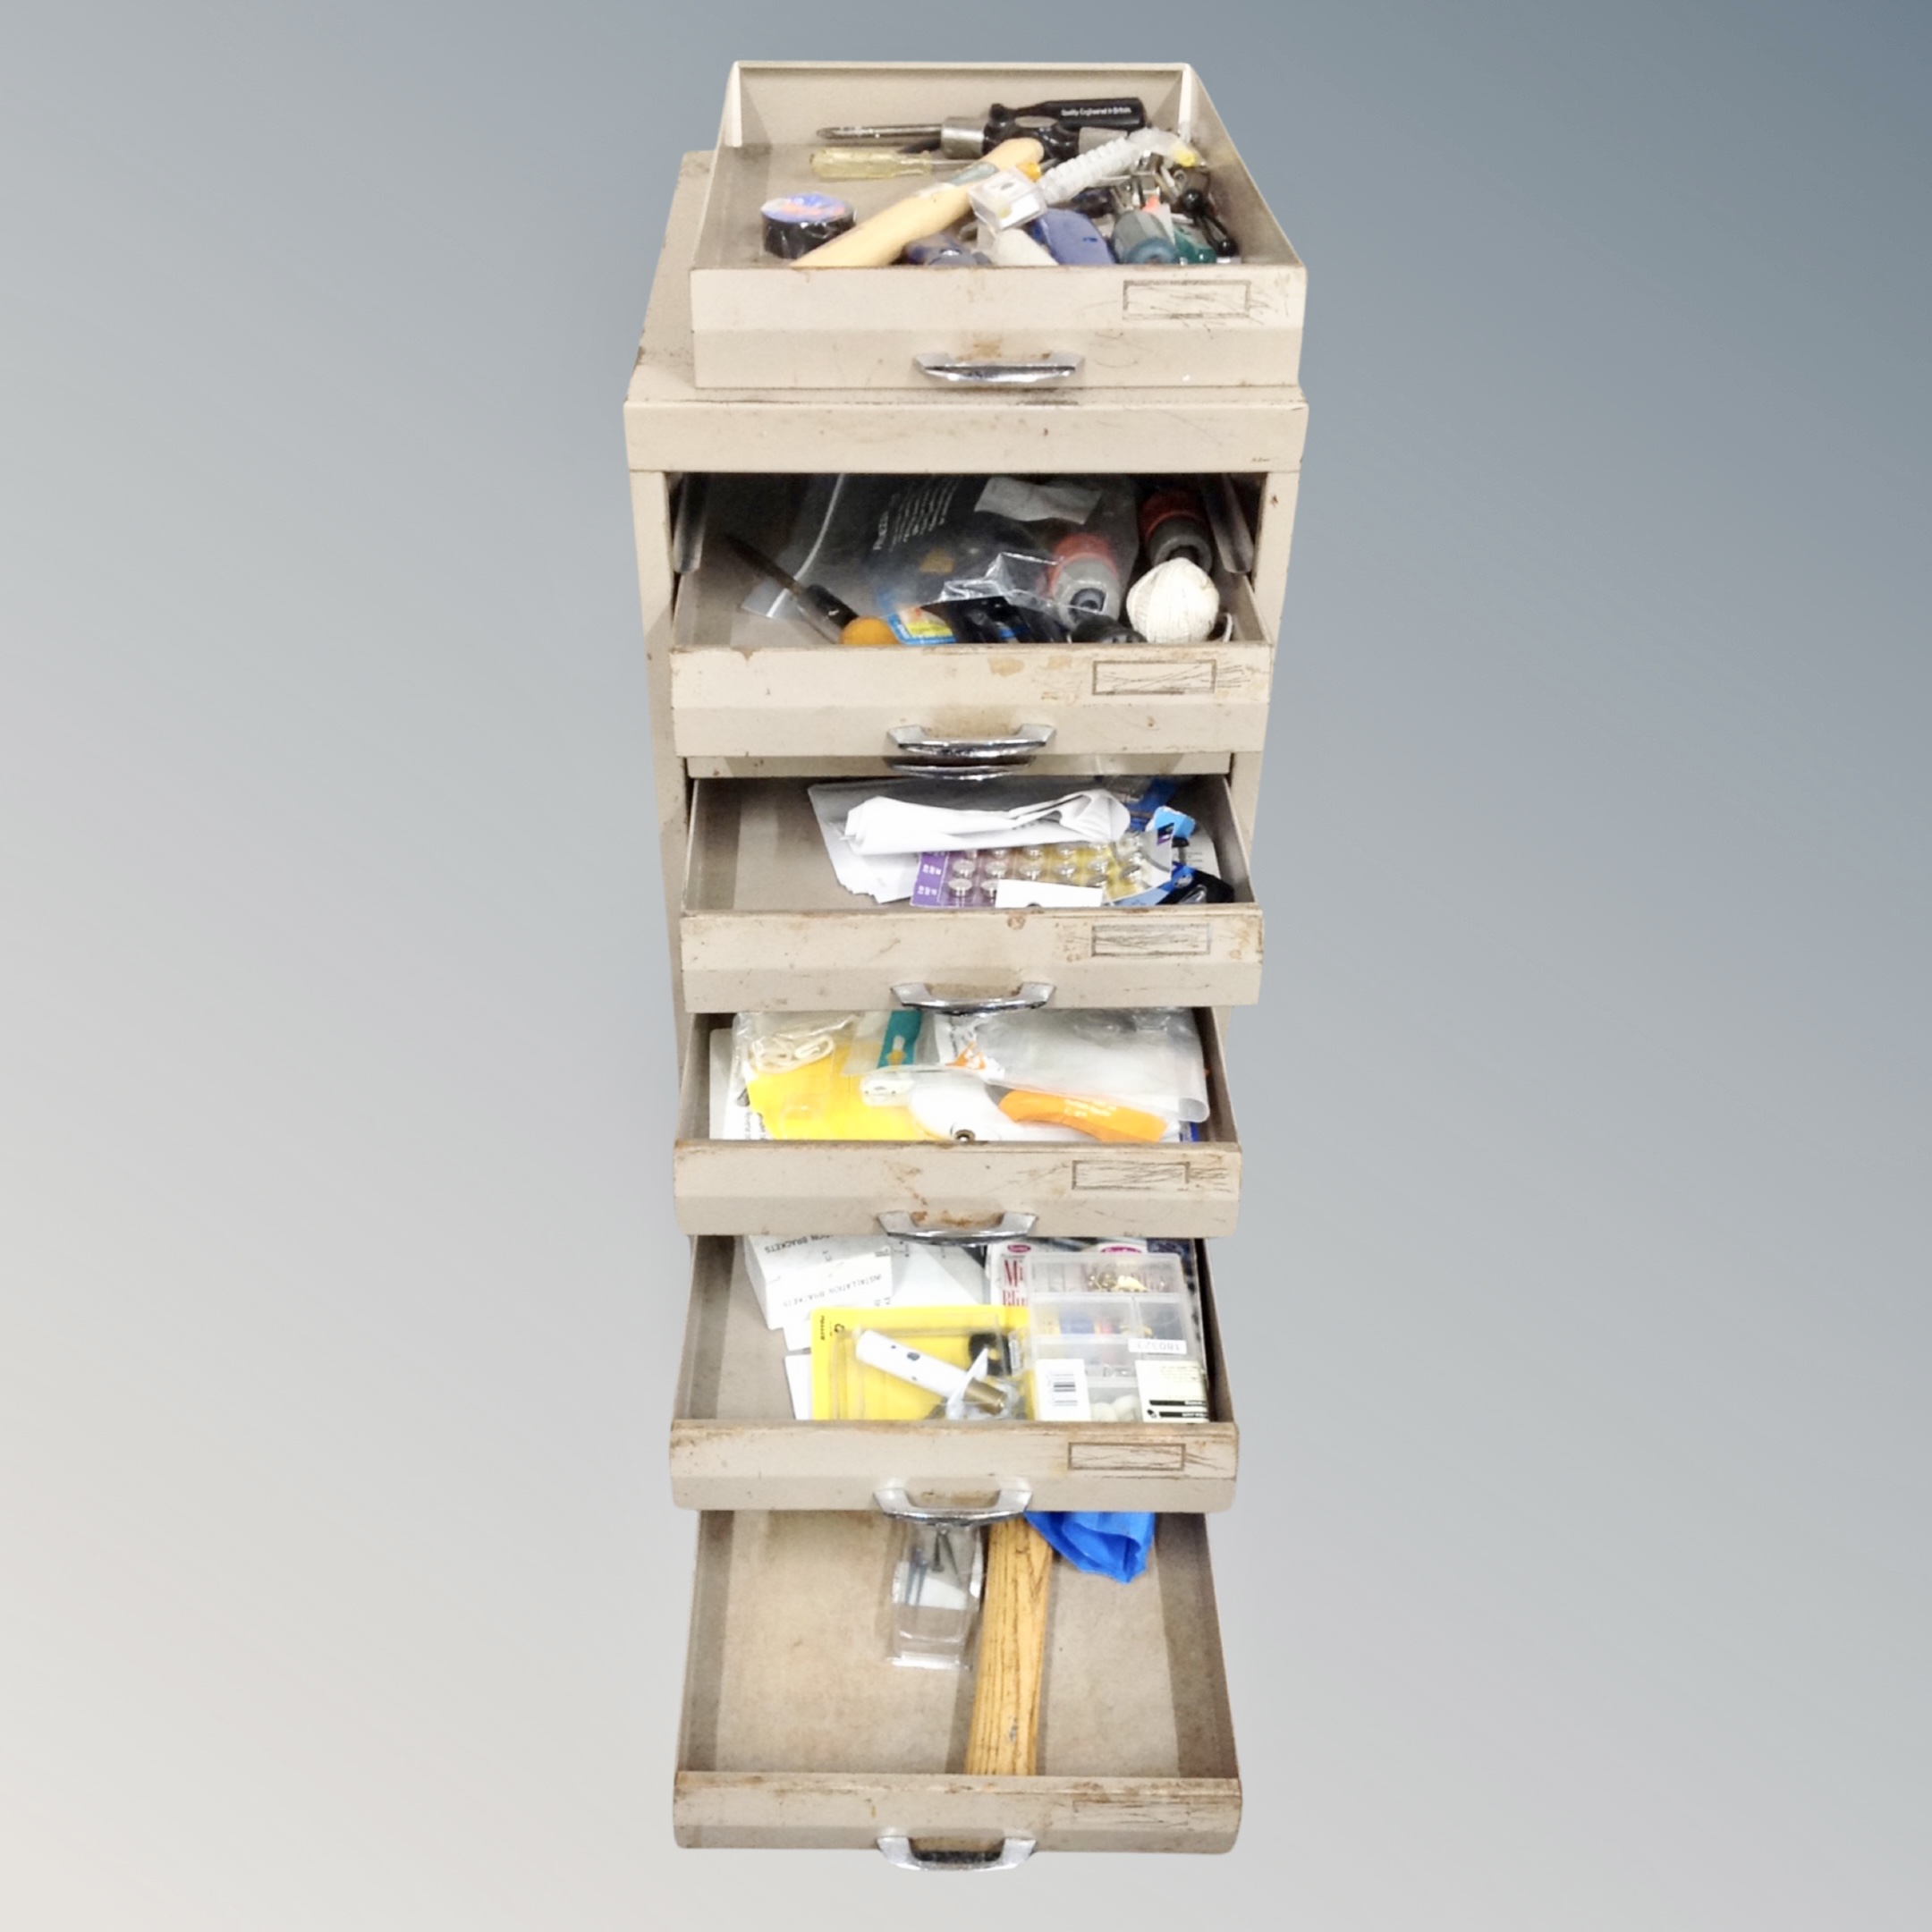 A metal ten drawer filing chest containing hand tools and hard ware - Image 2 of 2